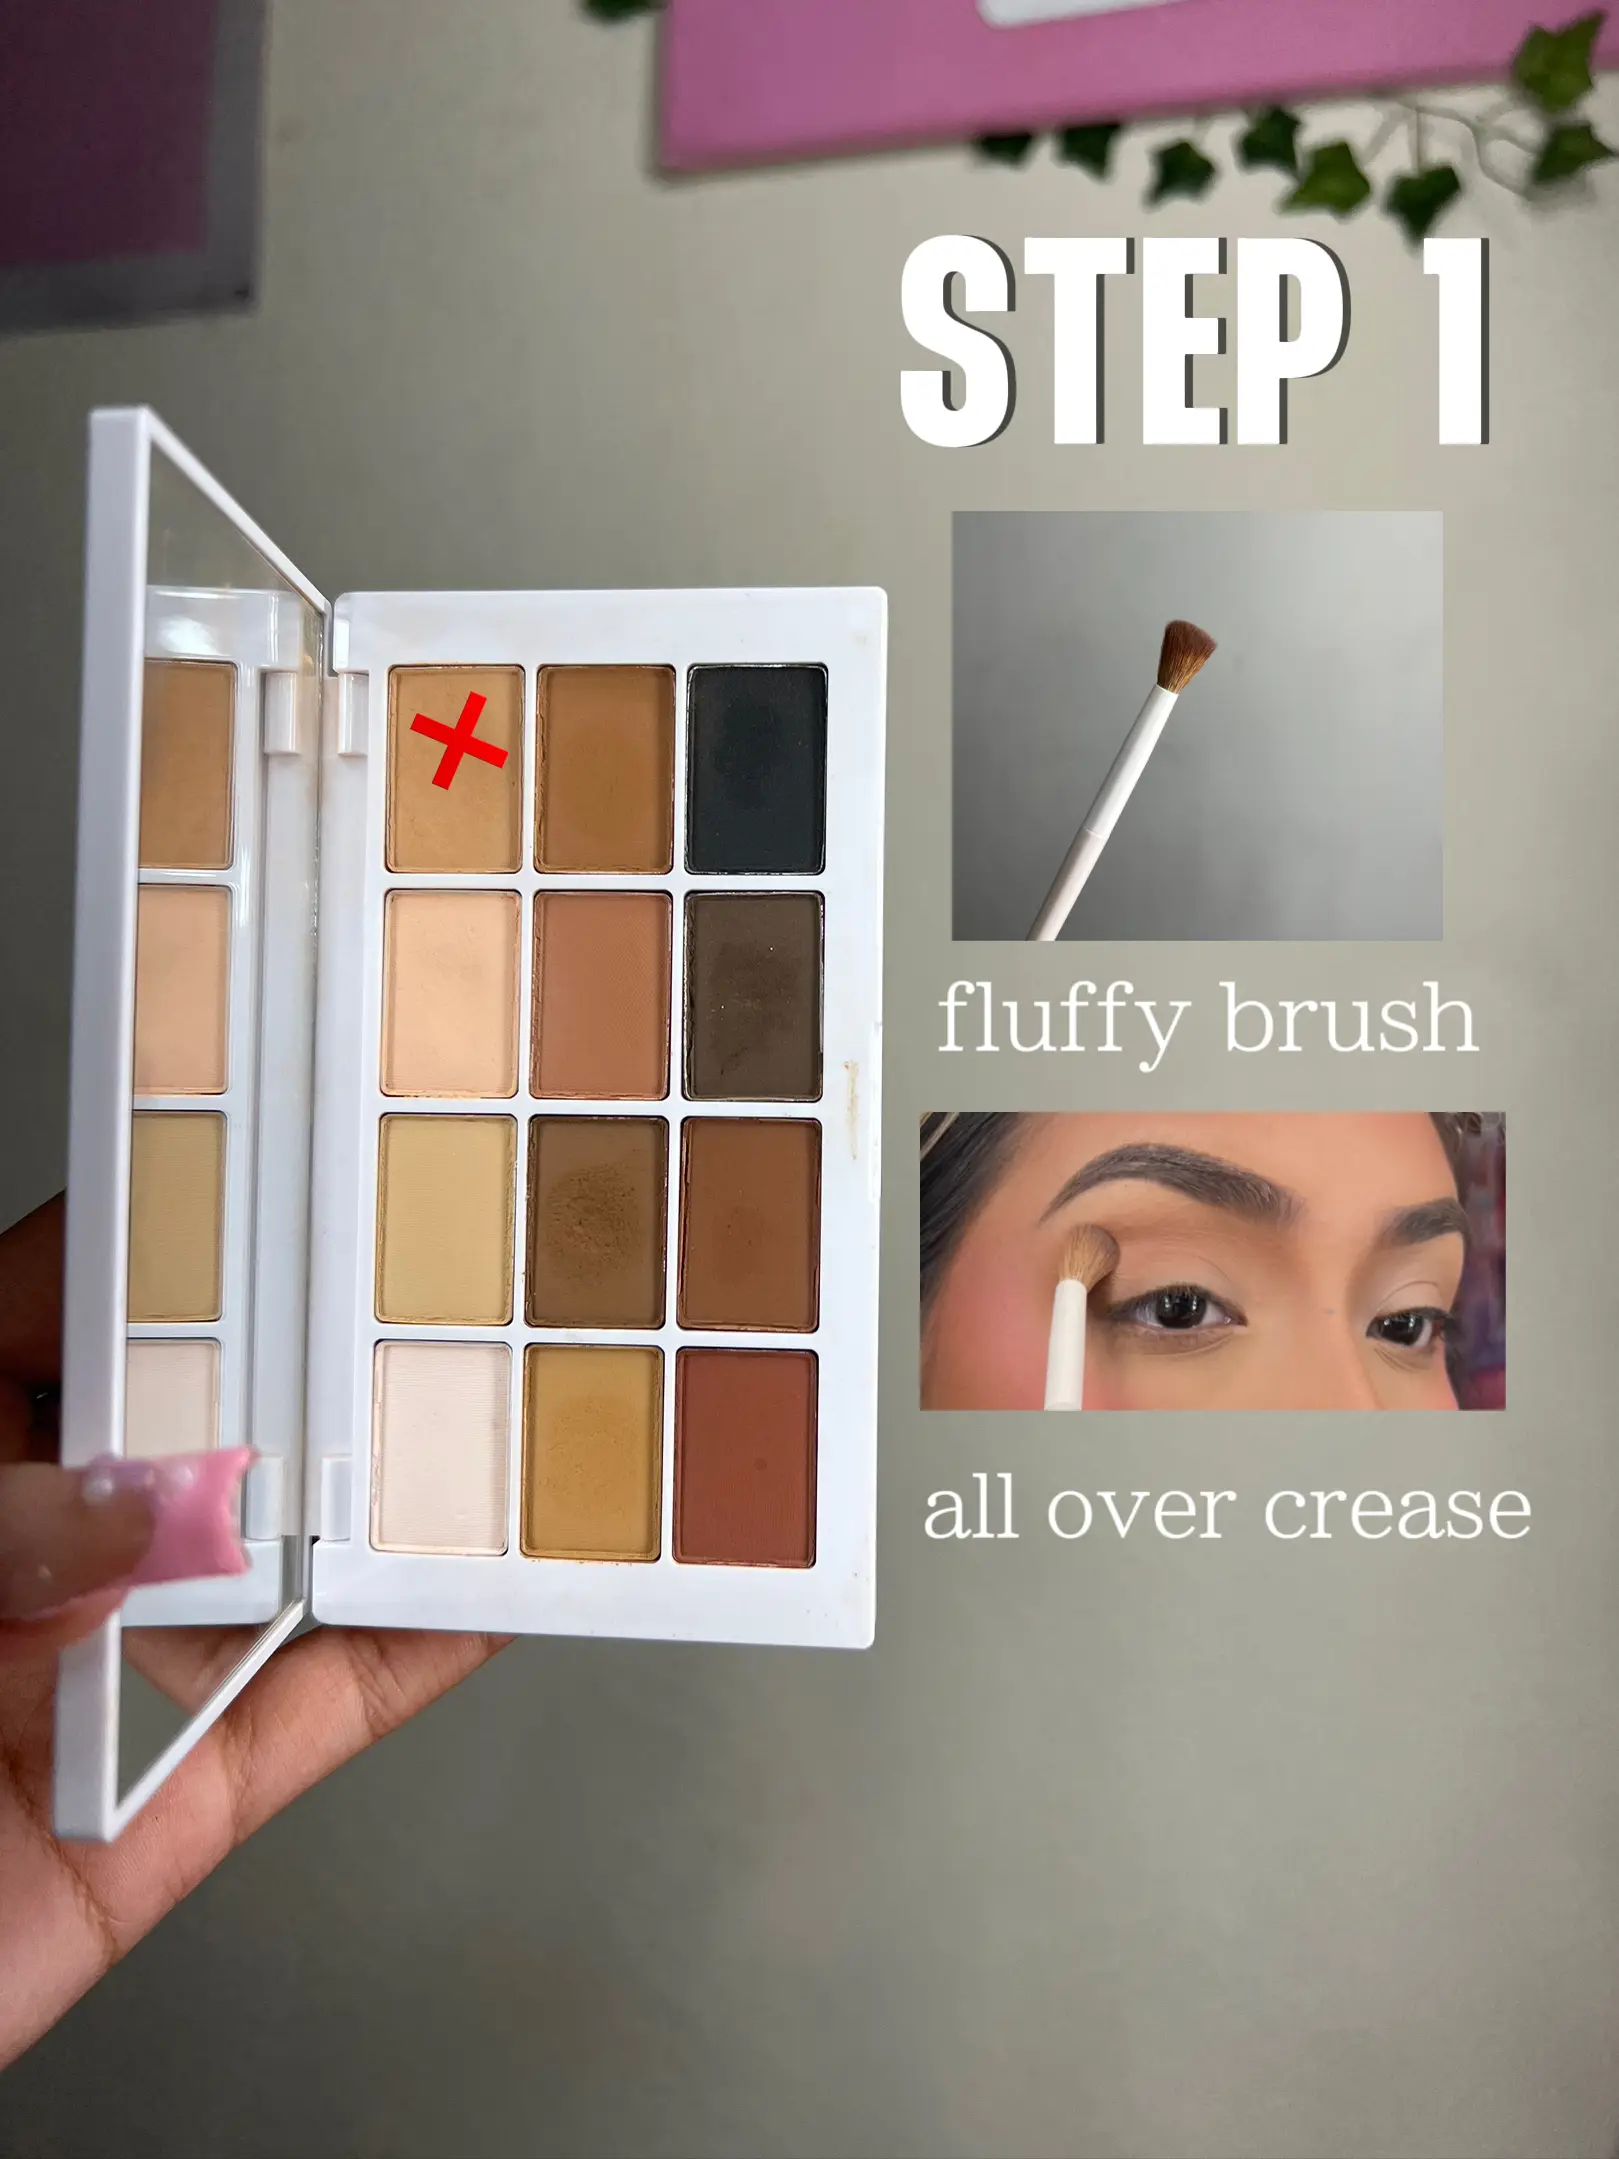 easy makeup routine from Eden._rose - Lemon8 Search